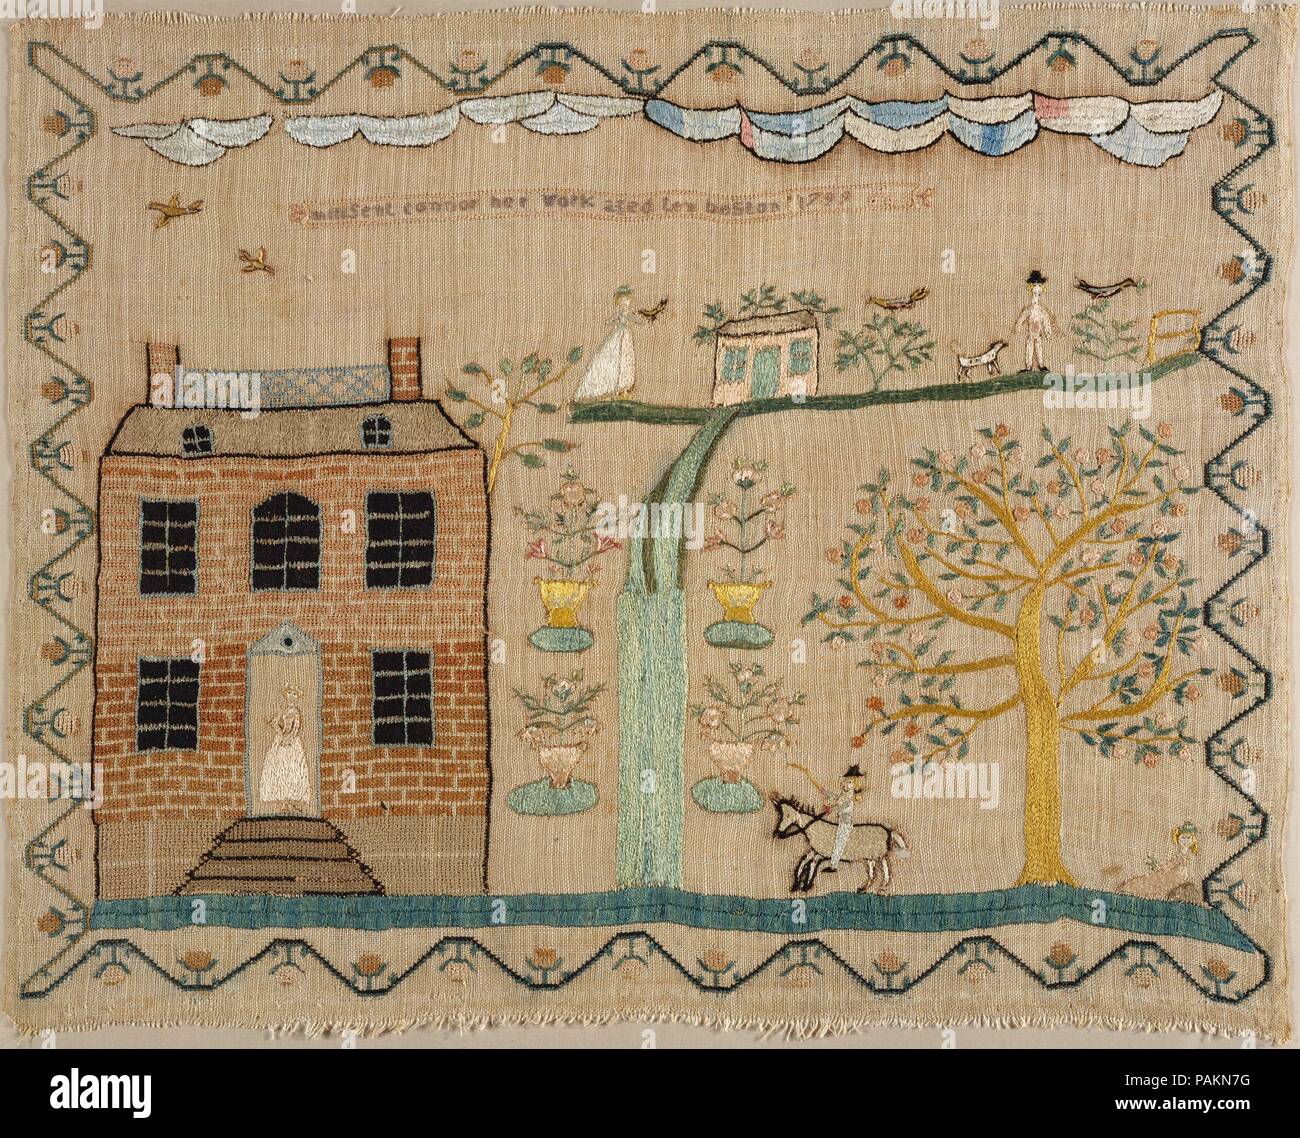 Embroidered Sampler. Culture: American. Dimensions: 21 1/8 x 16 1/4 in.  (53.7 x 41.3 cm). Maker: Millsent Connor (born 1789). Date: 1799. A female  figure greets visitors at the front door of